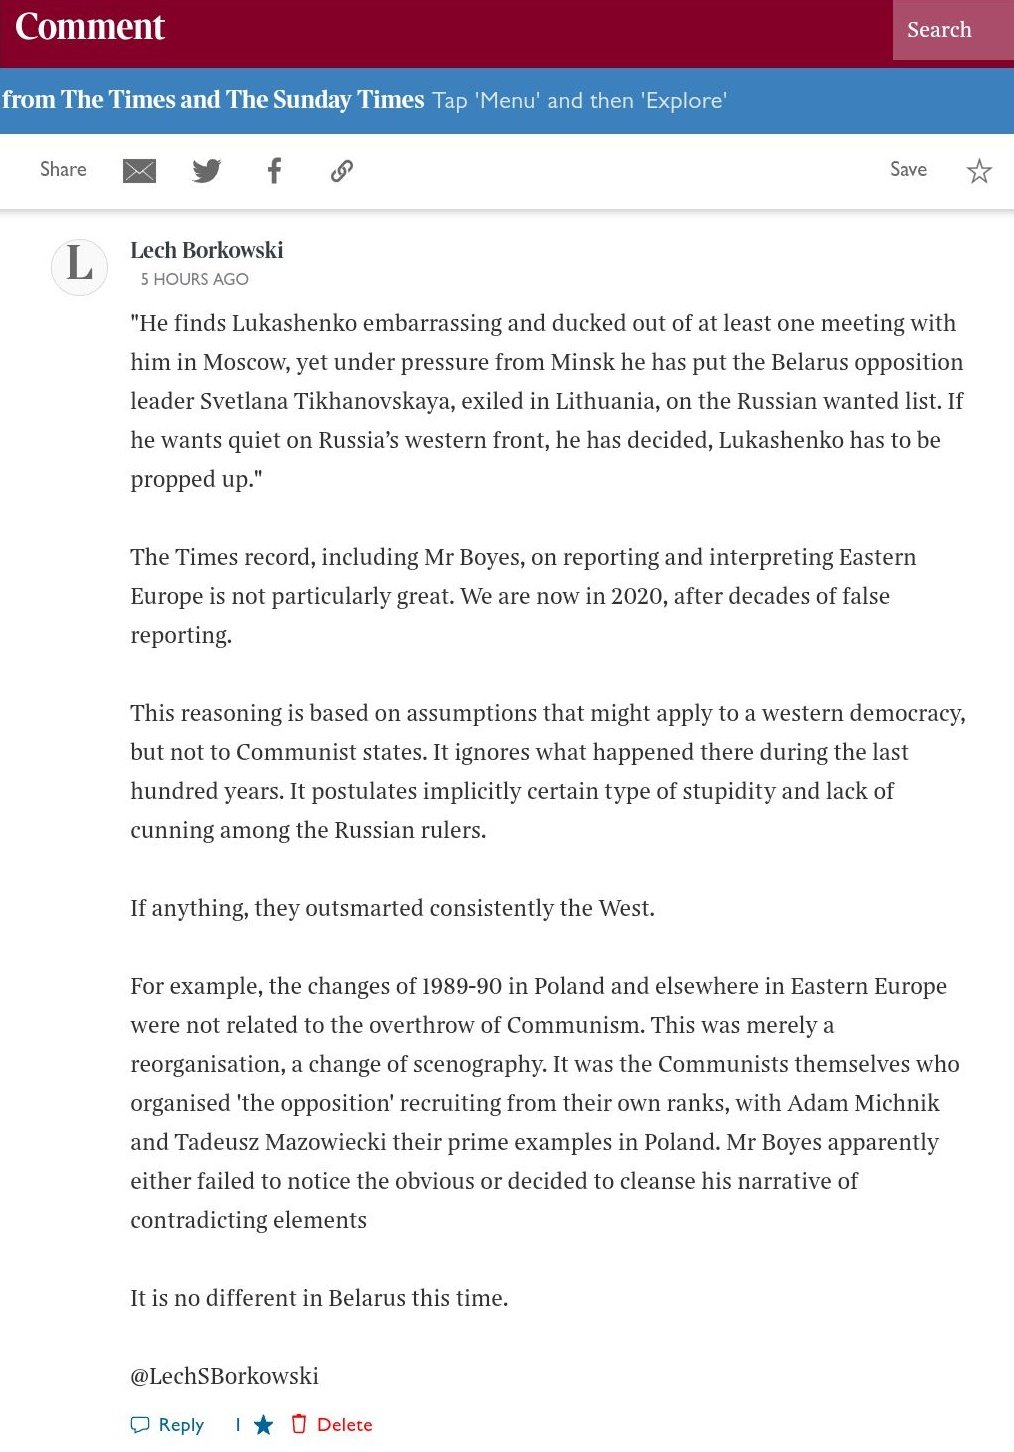 Lech S Borkowski comment in The Times 21 October 2020